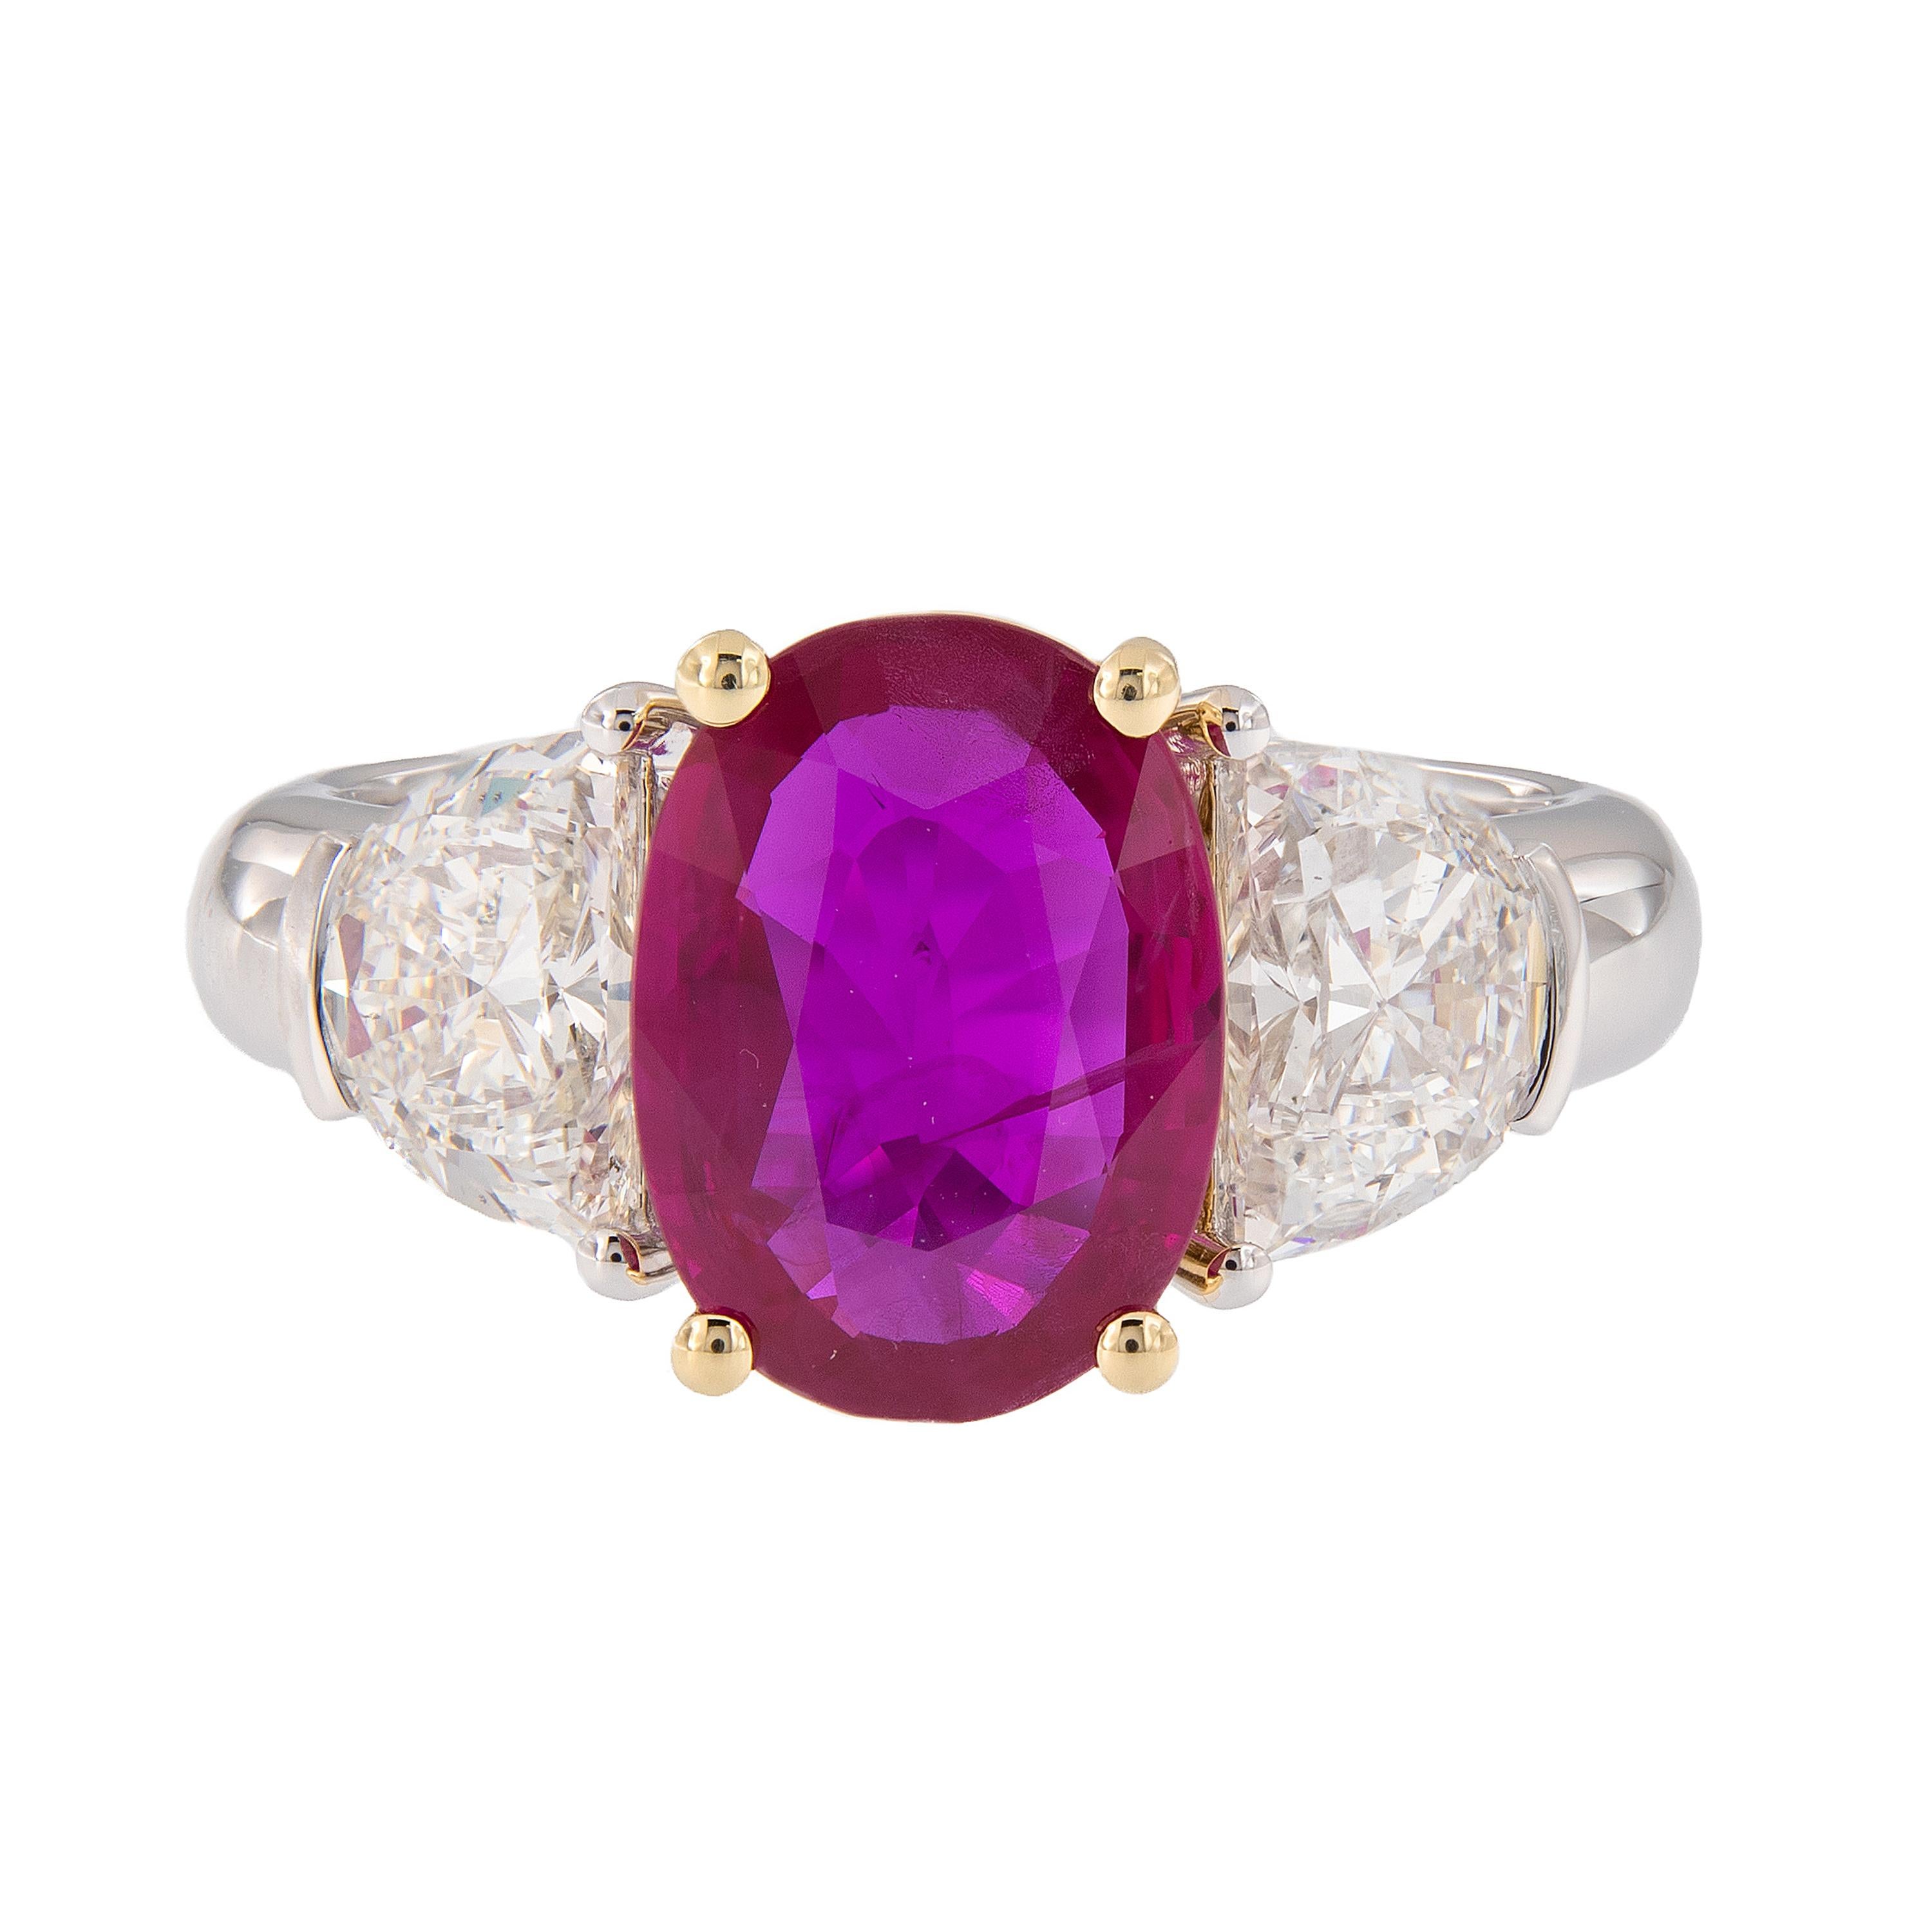 Make a statement with this beautiful and impressive three-stone ring. The ring centers around a stunning three carat oval cut natural Burma ruby accented with two moon-cut diamonds. The ruby is prong set and framed by 18k yellow gold and diamonds